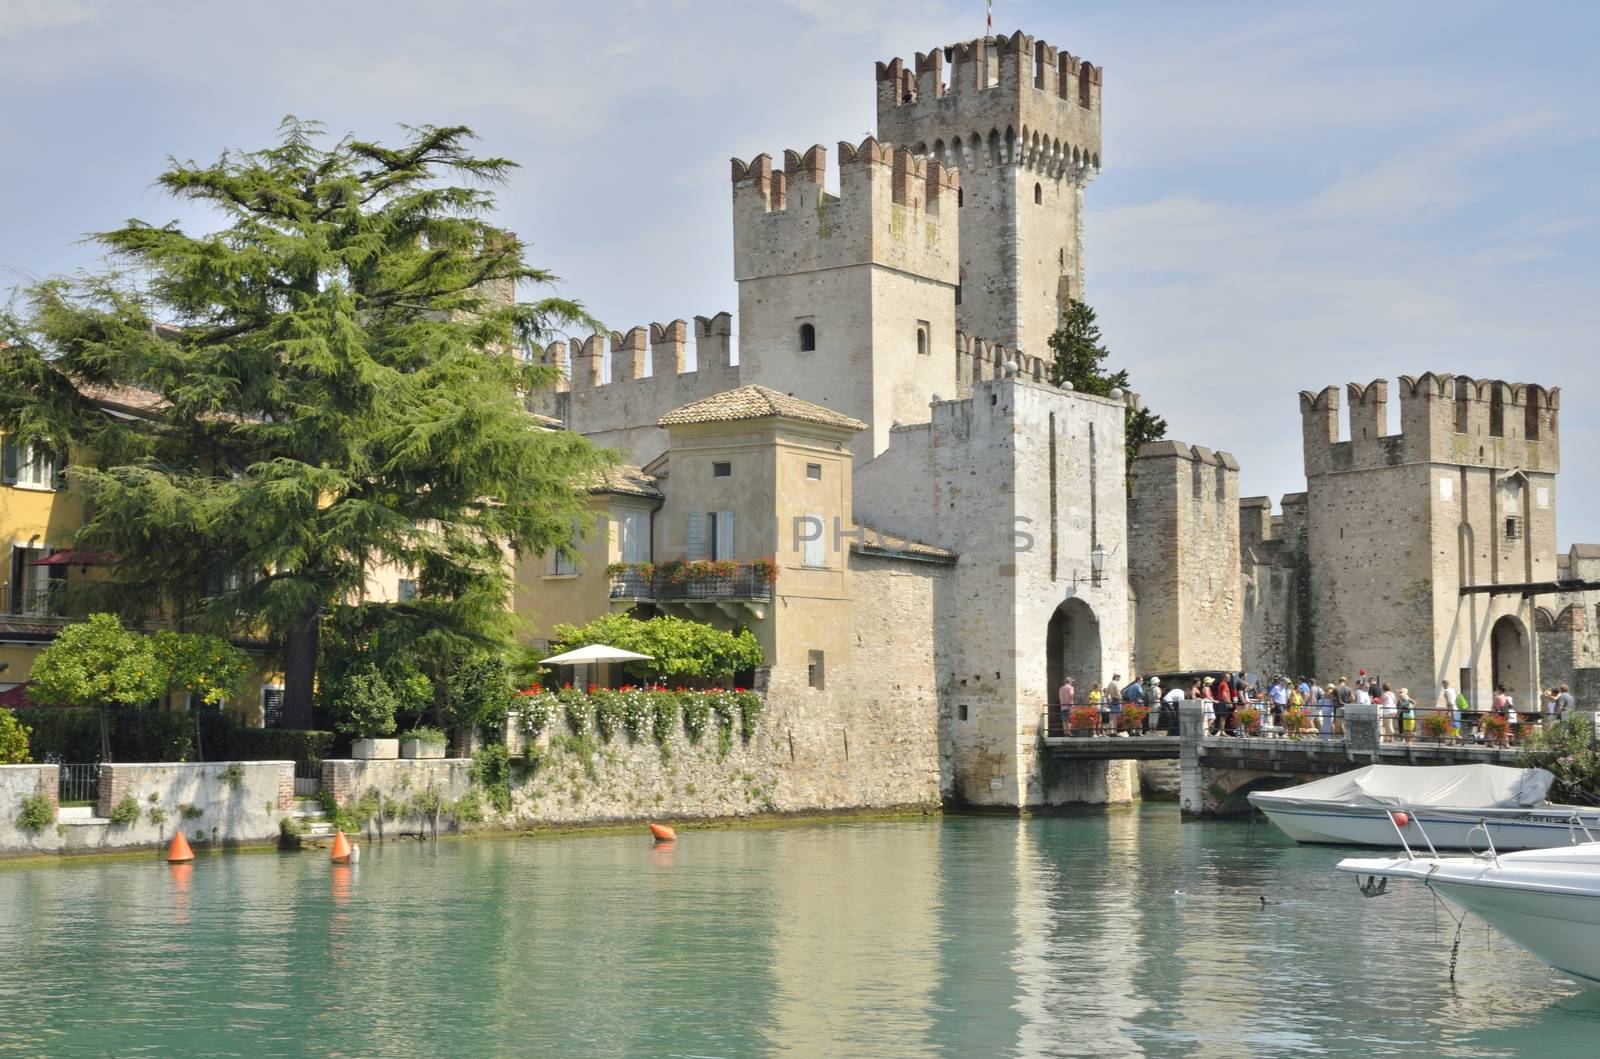 Tourists visiting the Scaliger Castle at Sirmione on lake Grada, Italy. The Castle was built in the 13th century.  This is a rare example of medieval port fortification, which was used by the Scaliger fleet.